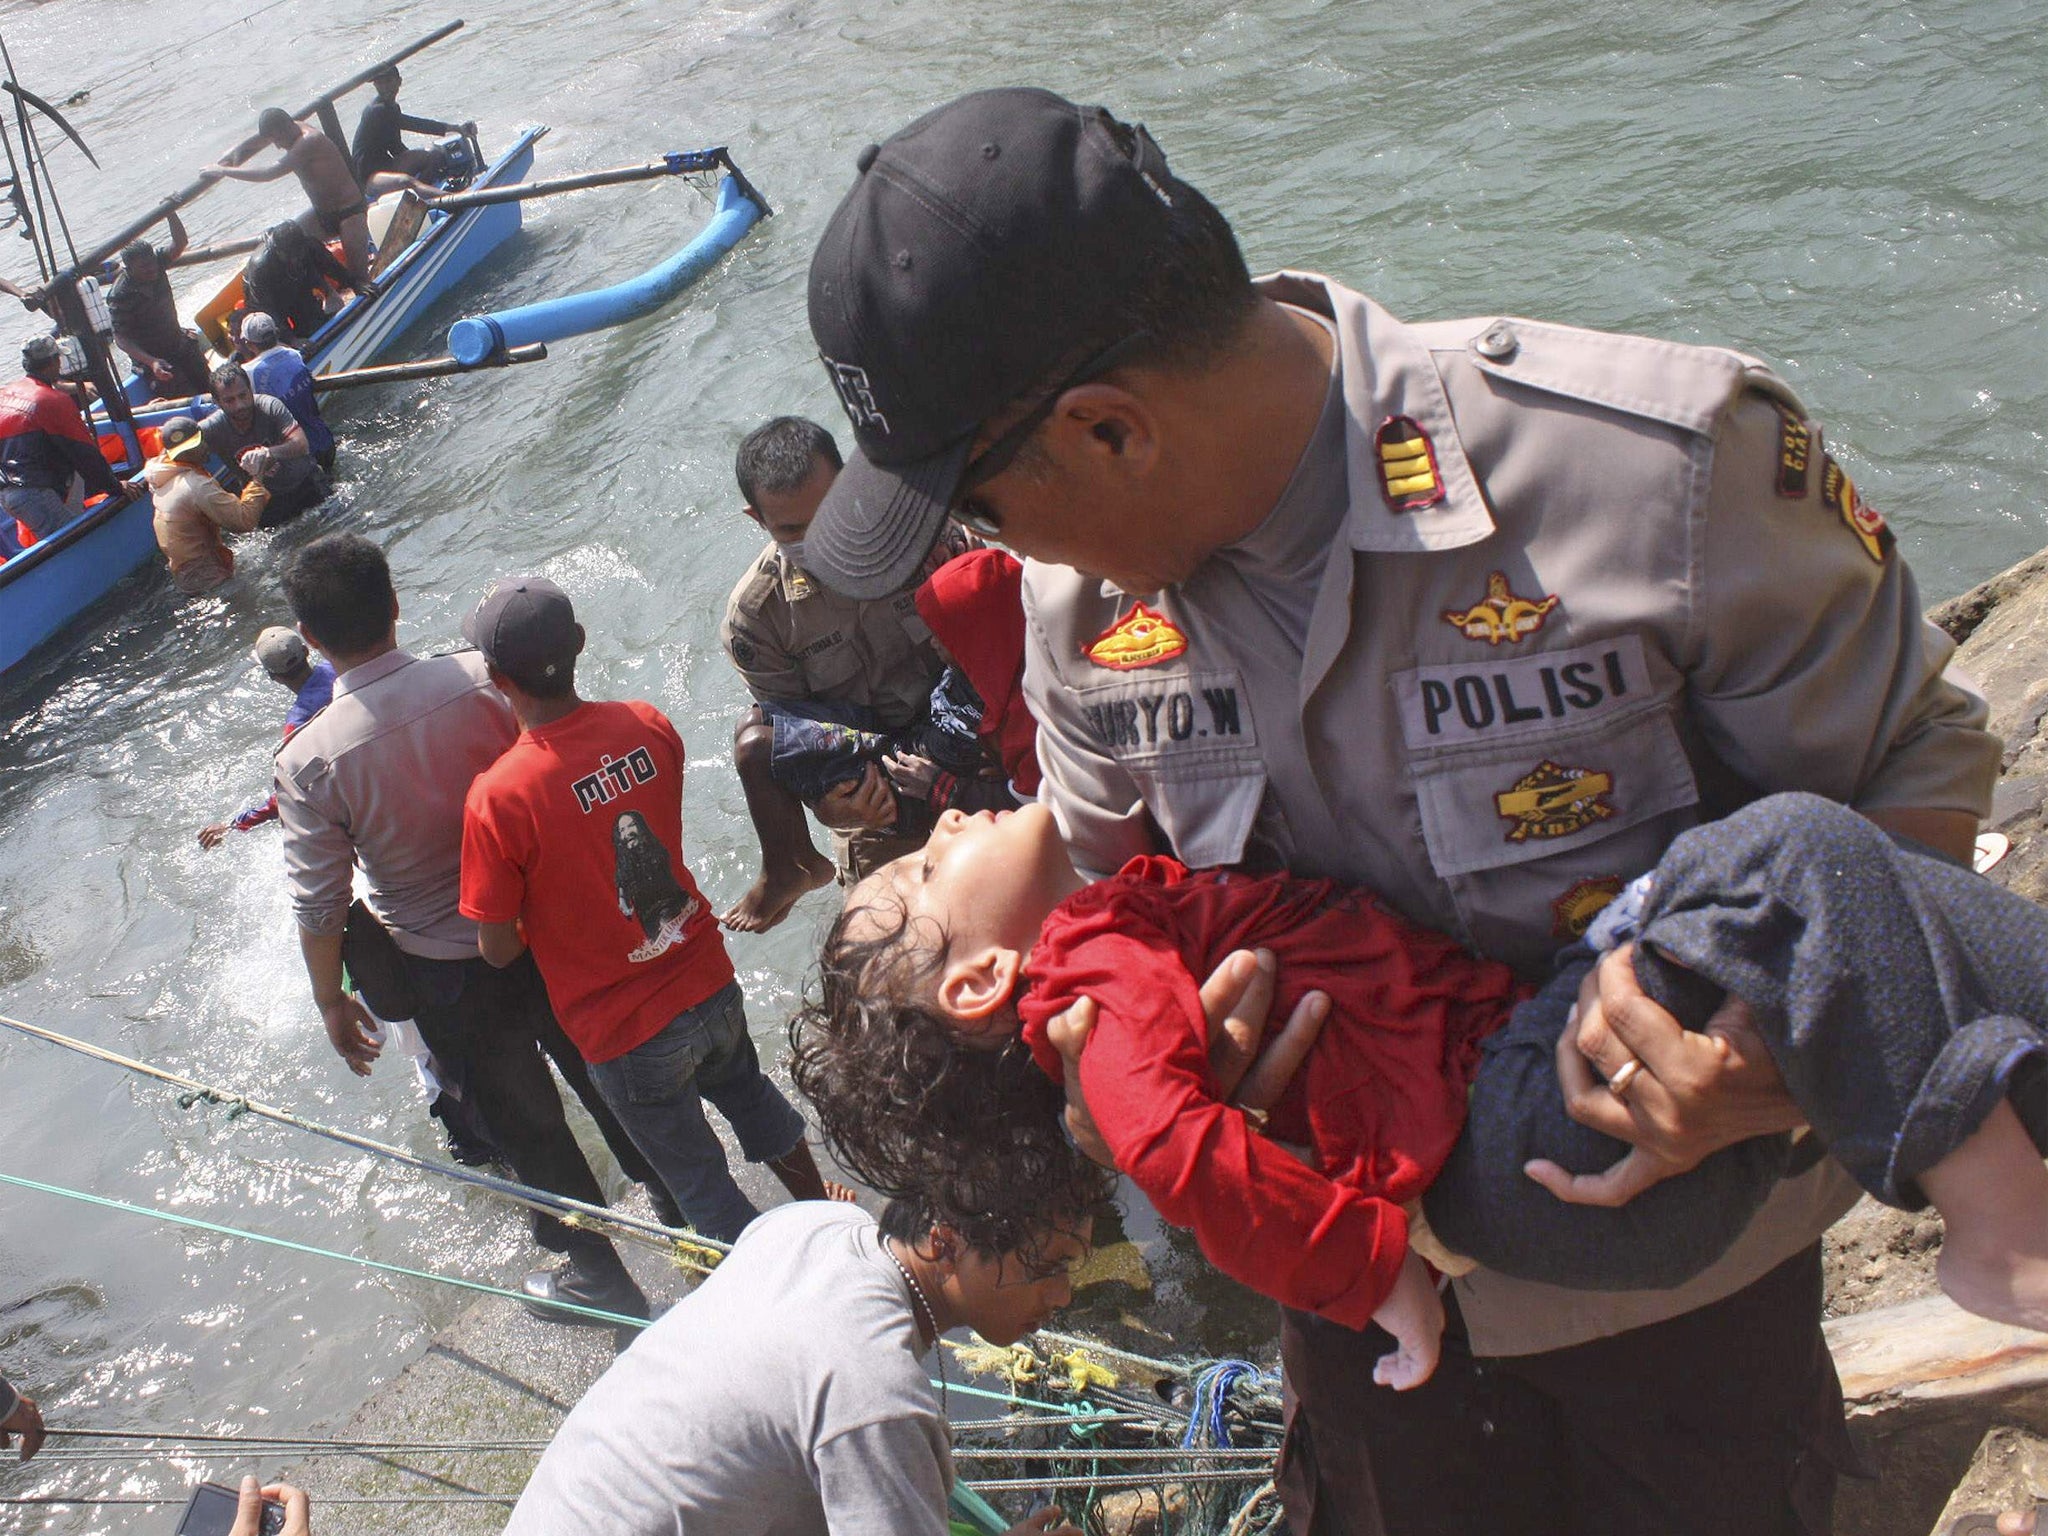 A police officer carries a child survivor who was on the boat full of asylum seekers that capsized off the coast of Sukapura, Indonesia.